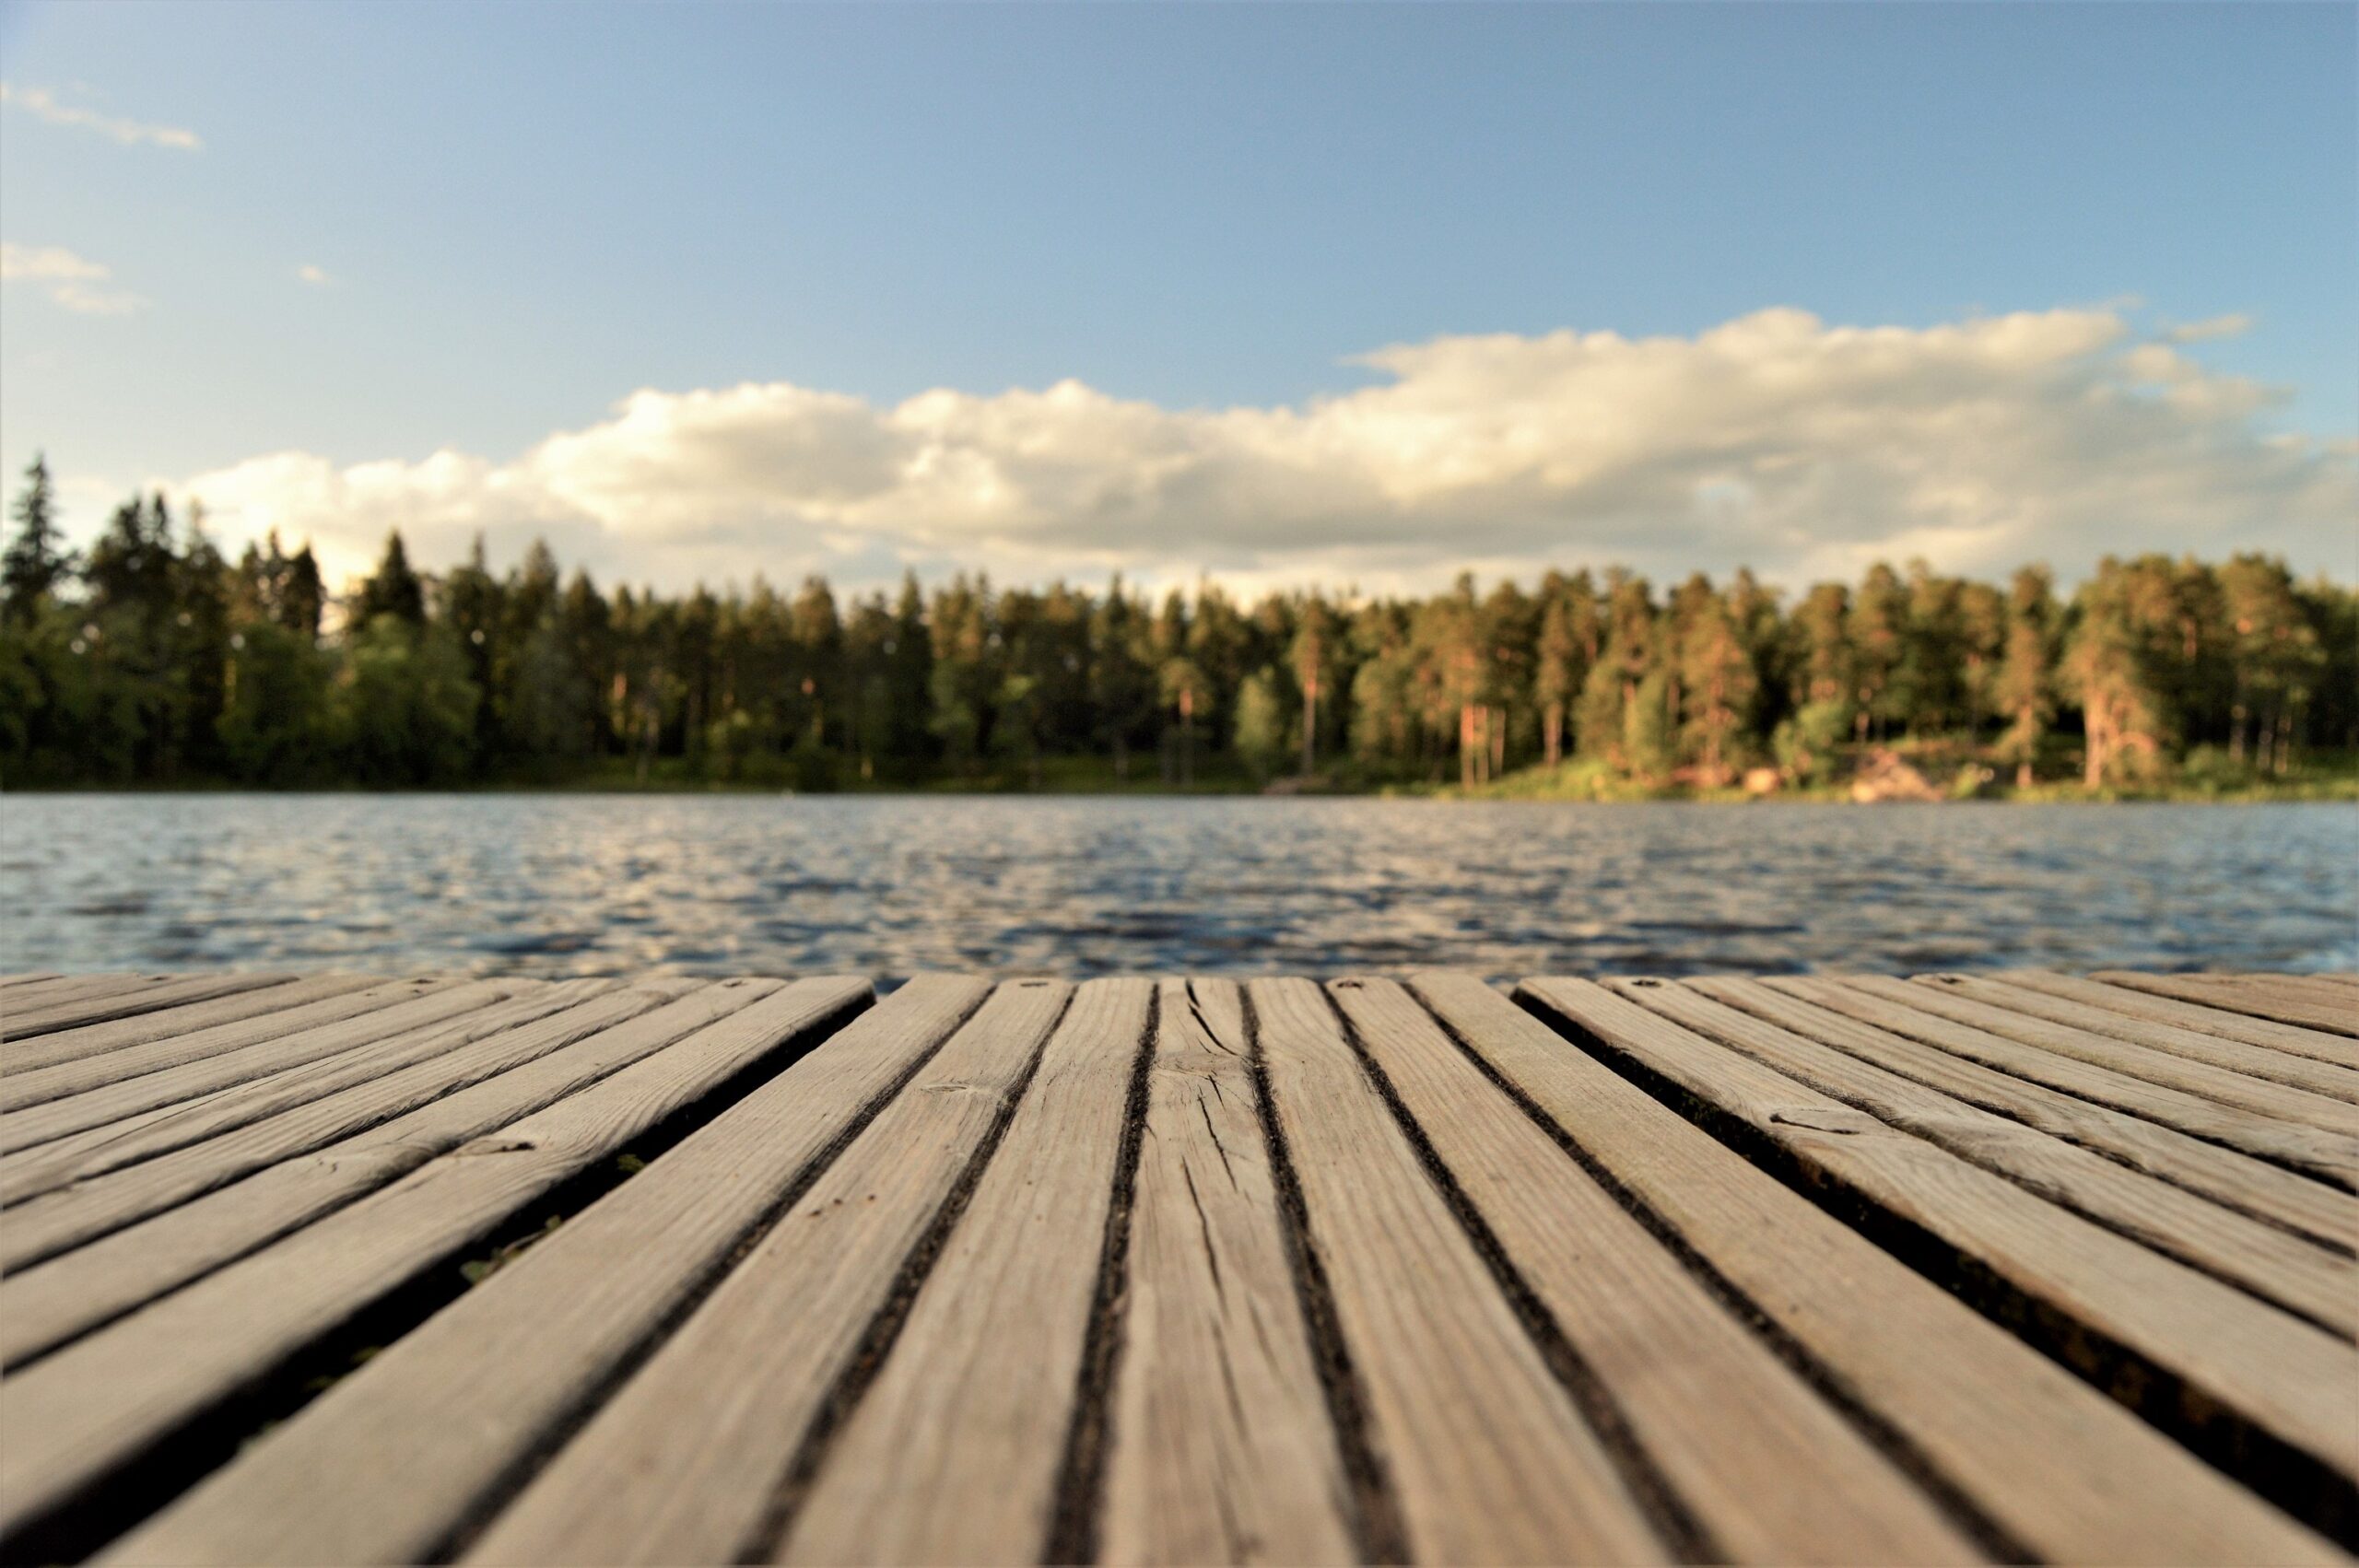 A dock by the lake during an Ontario summer.